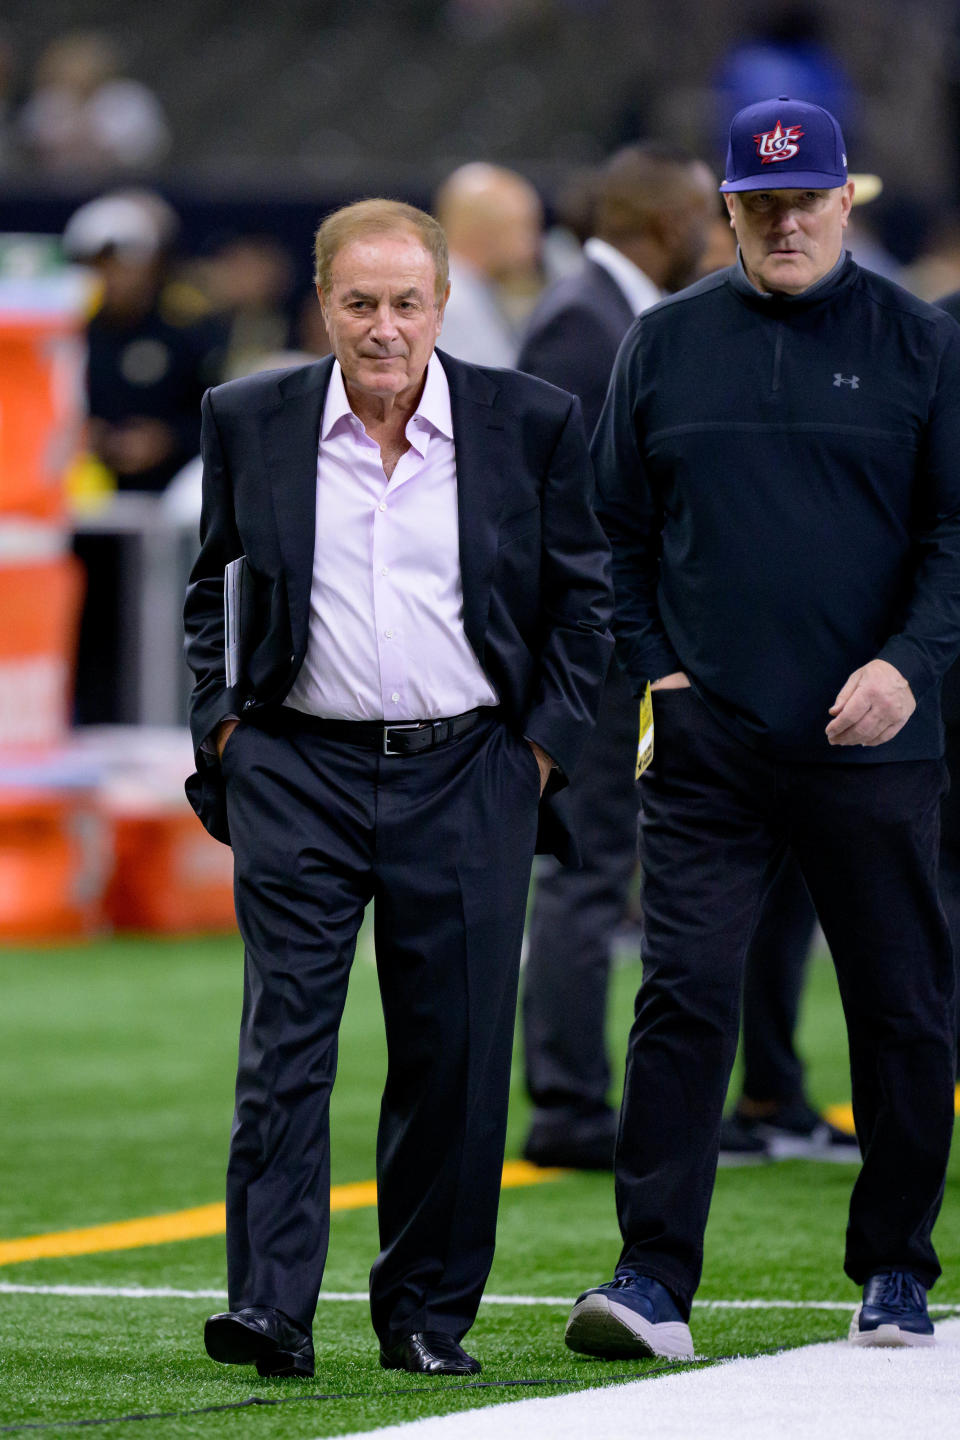 Oct 19, 2023; New Orleans, Louisiana, USA; Sports play-by-play announcer Al Michaels walks the sideline before a game between the New Orleans Saints and the Jacksonville Jaguars at the Caesars Superdome. Mandatory Credit: Matthew Hinton-USA TODAY Sports